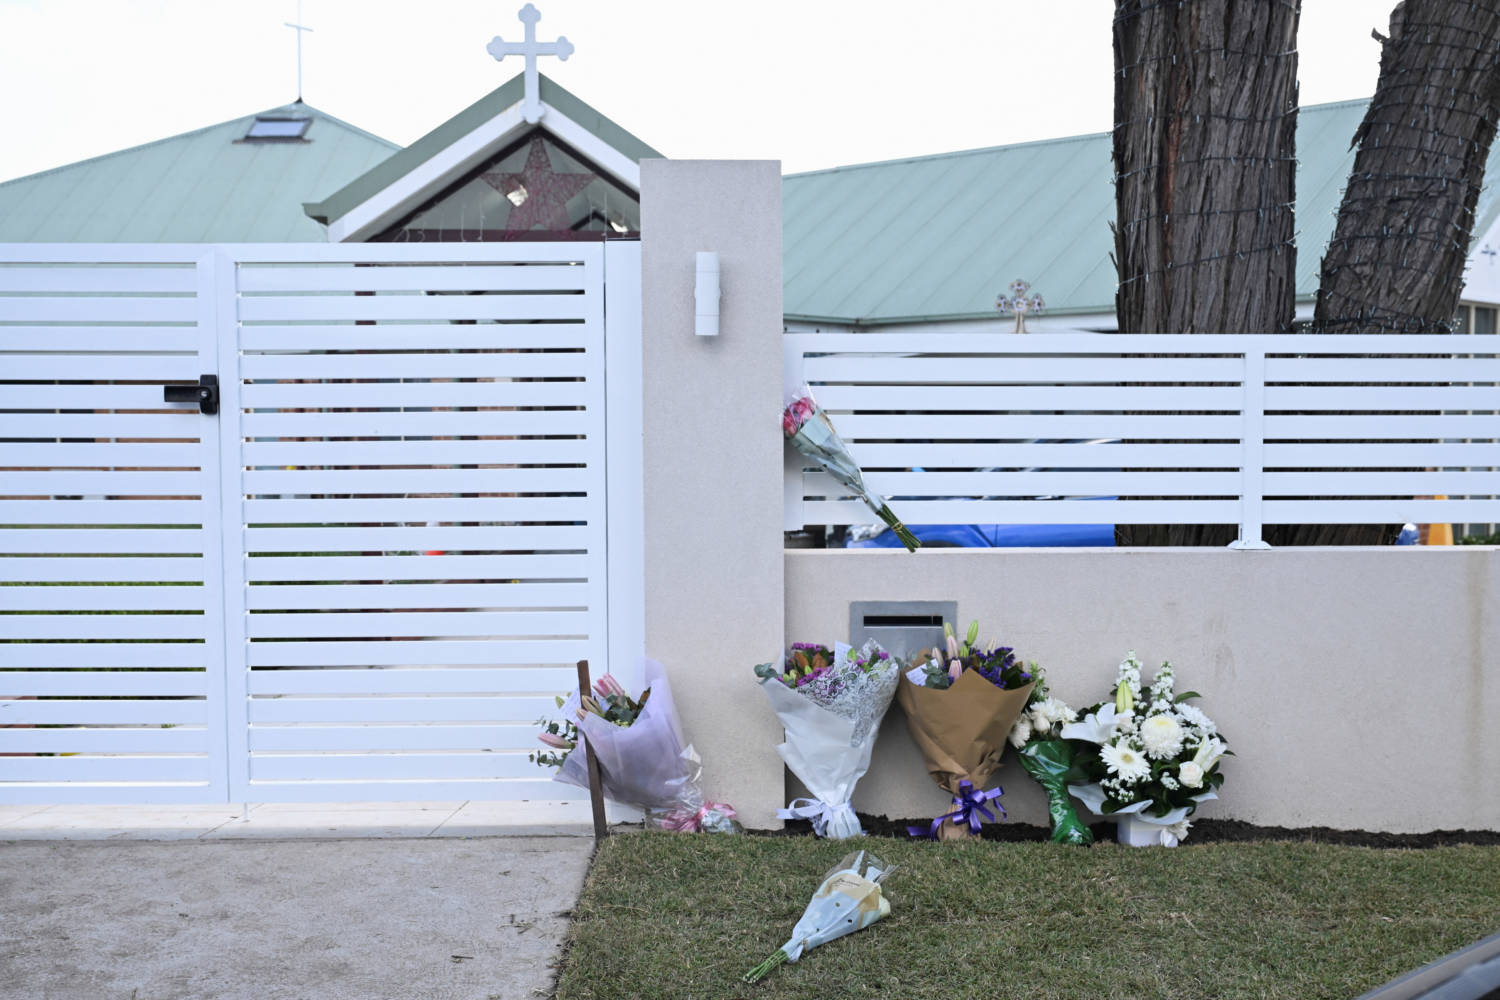 Aftermath Of A Knife Attack At The Assyrian Christ The Good Shepherd Church, In Sydney